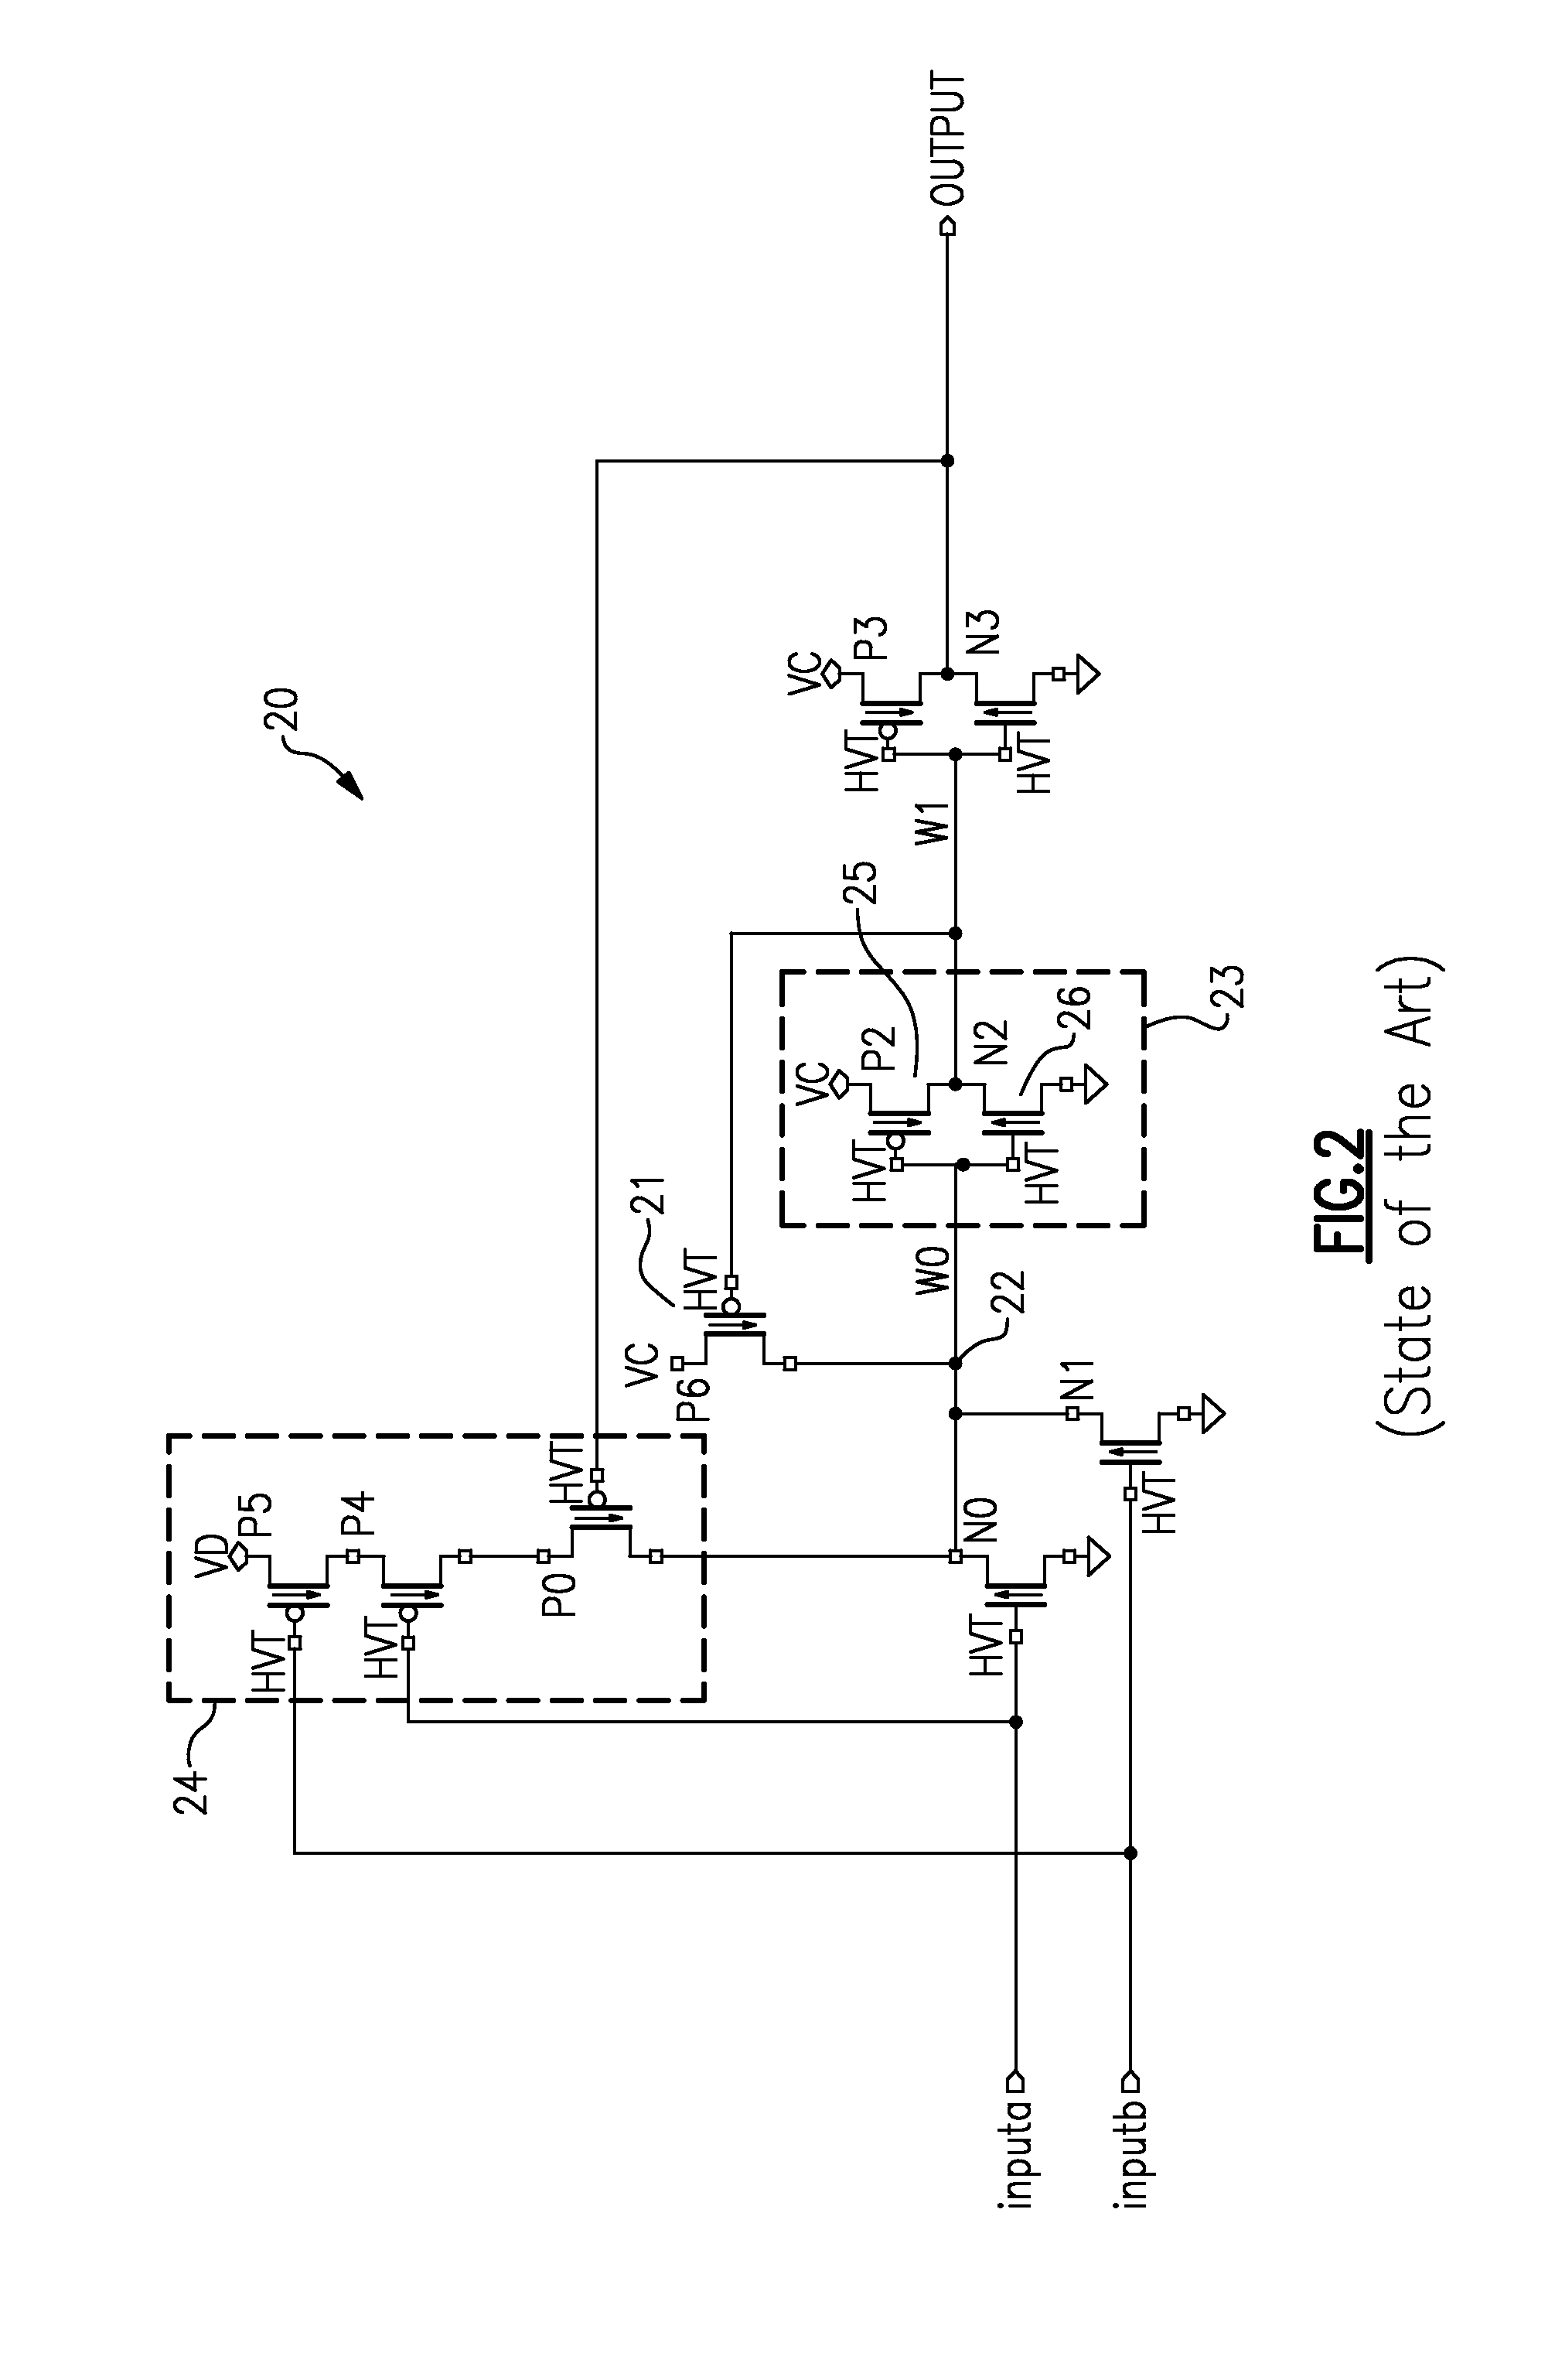 Circuit Combining Level Shift Function with Gated Reset